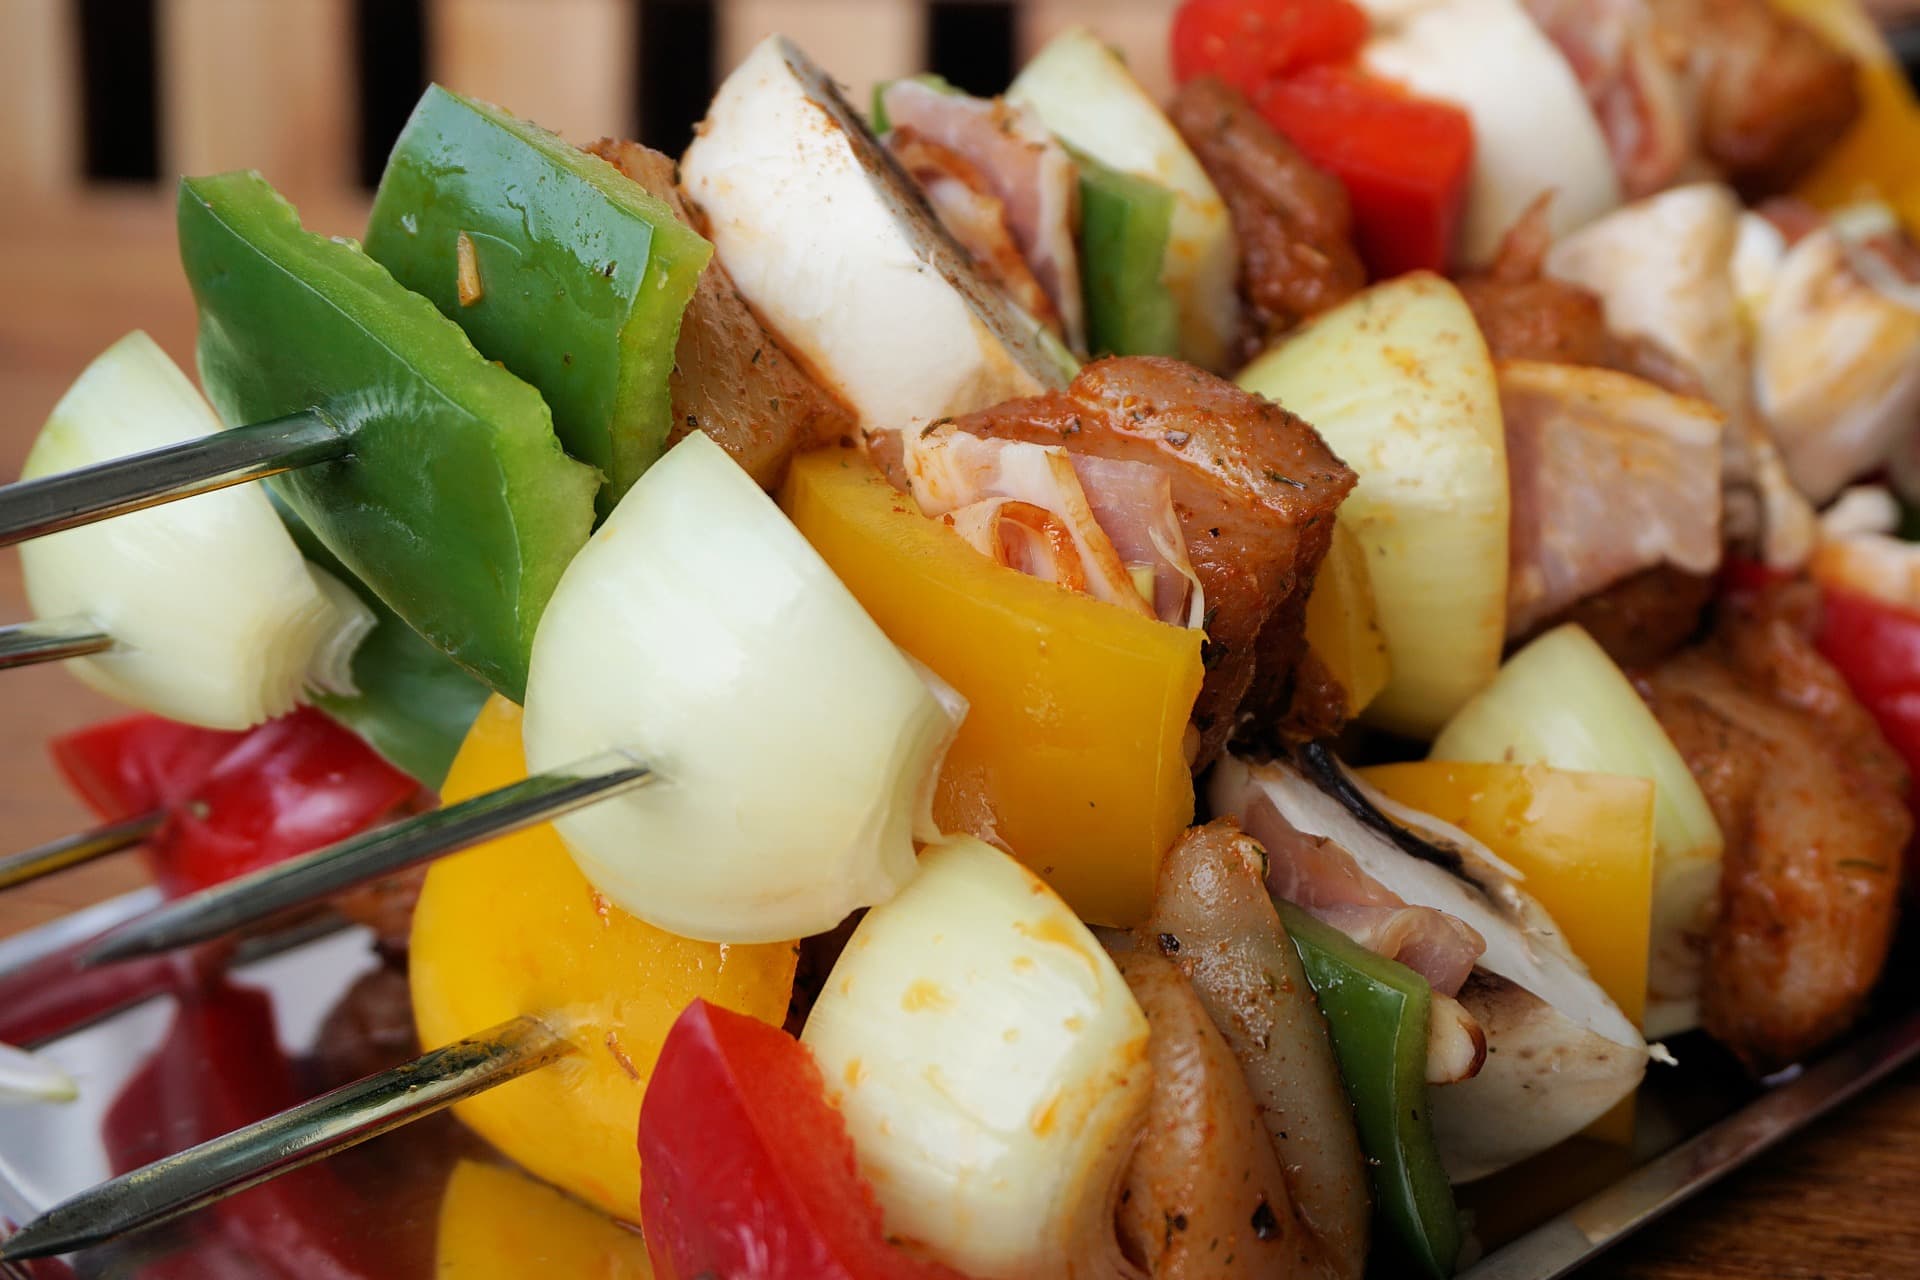 Kabobs for grilling